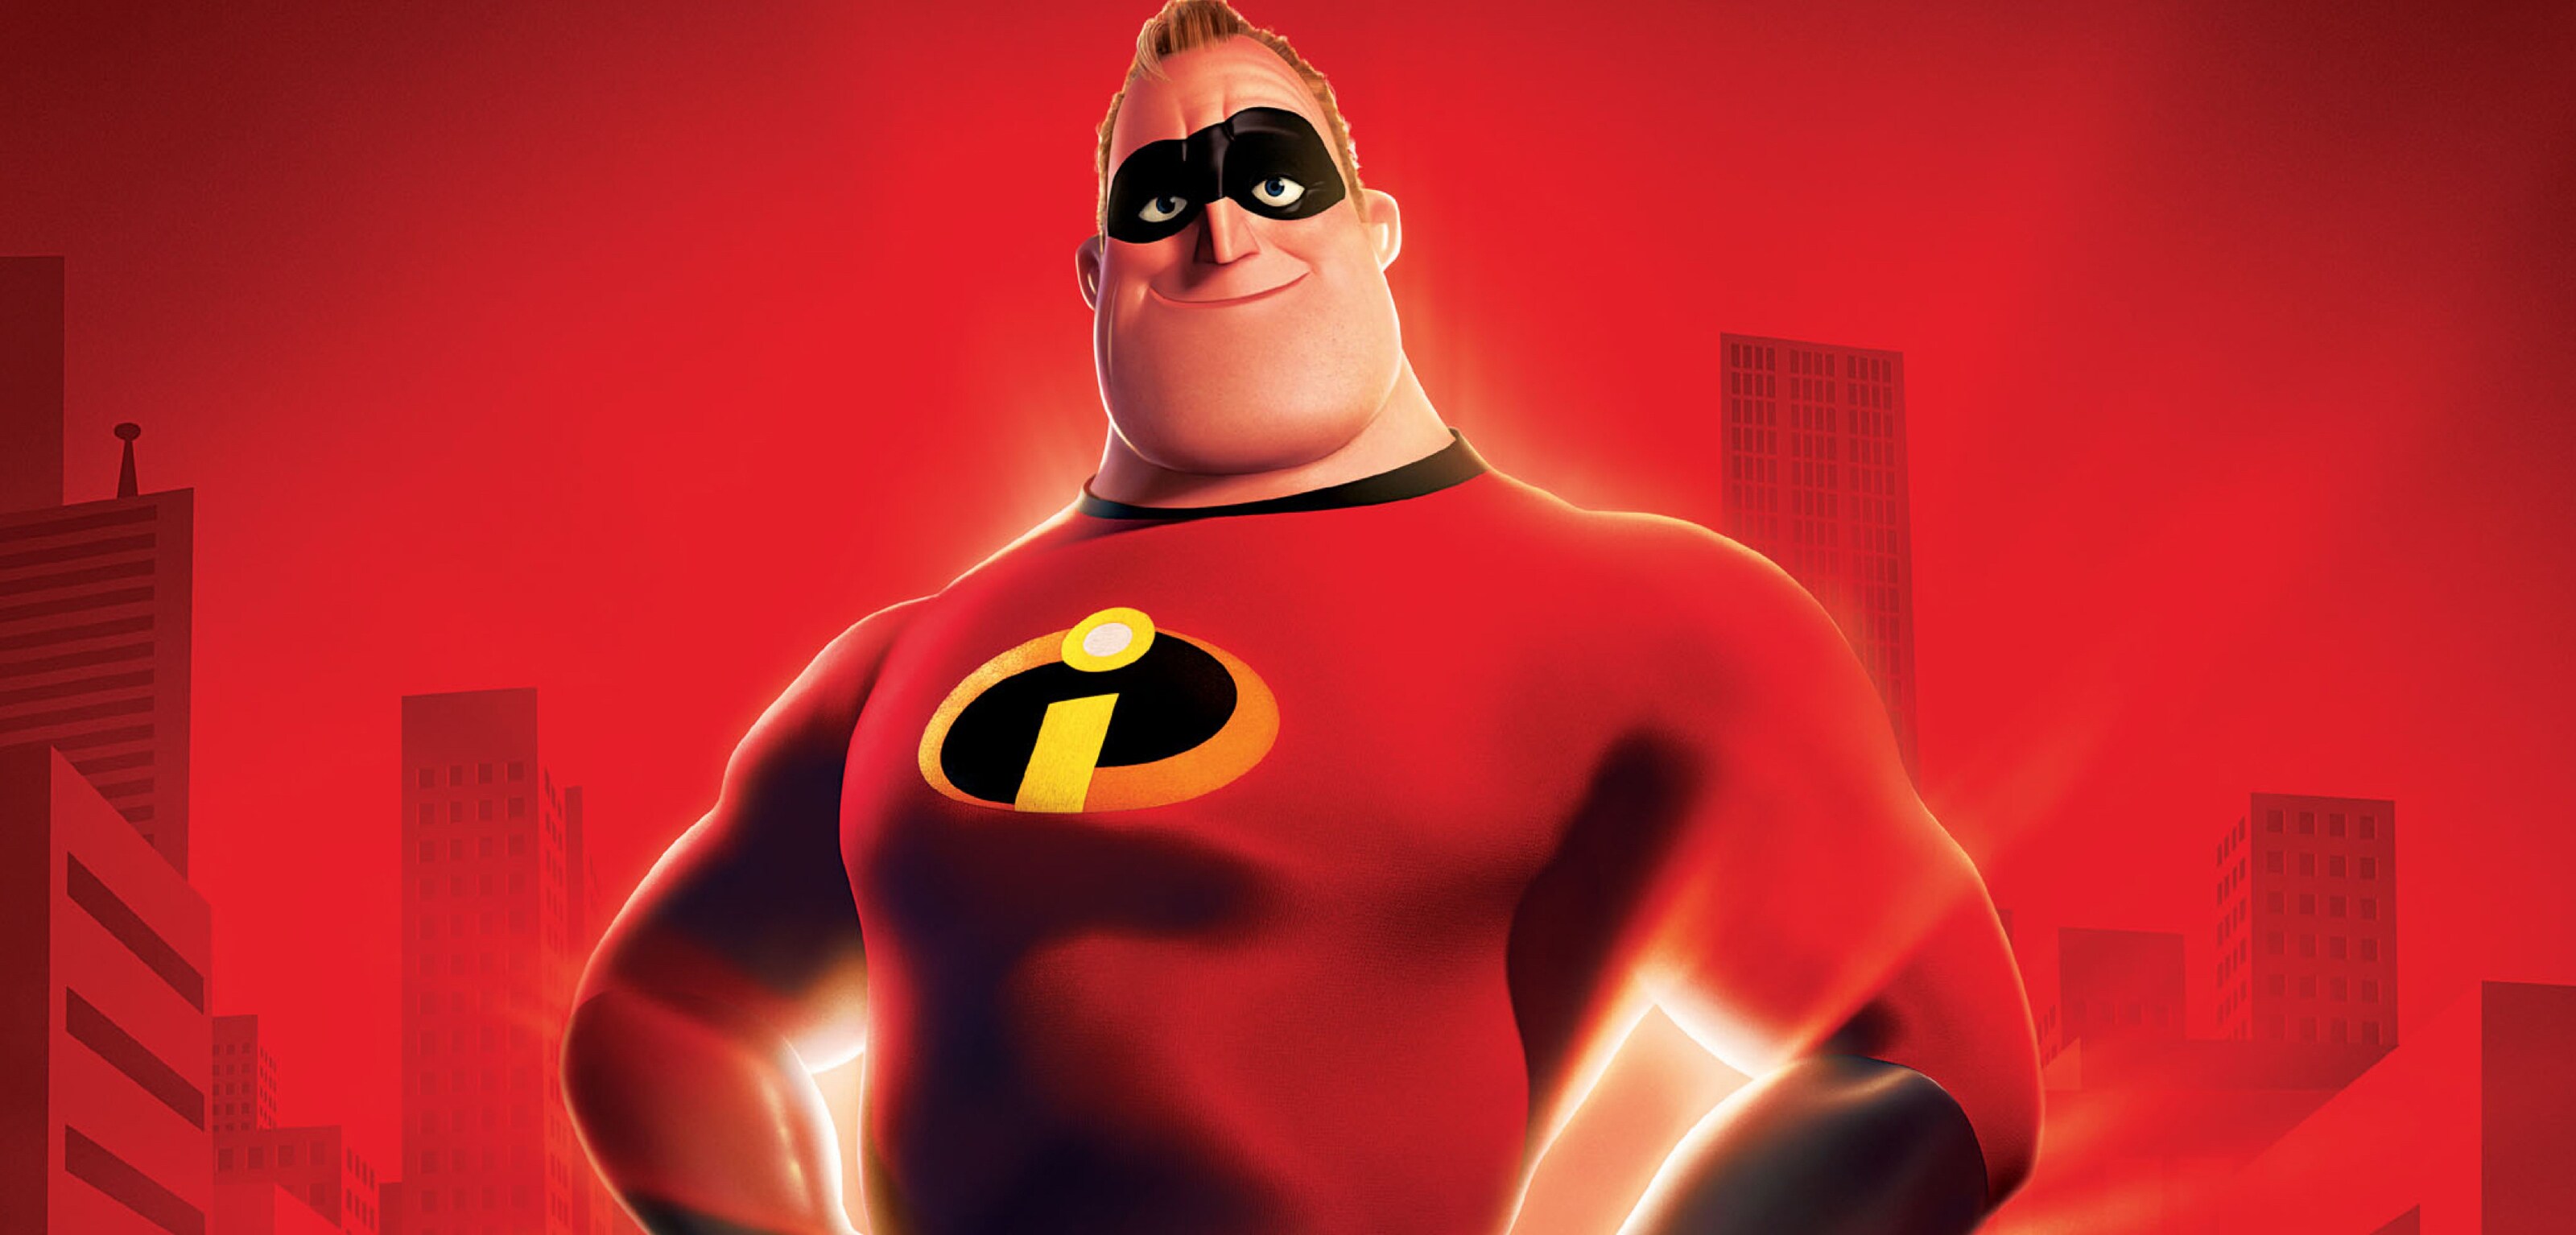 A still from The Incredibles 